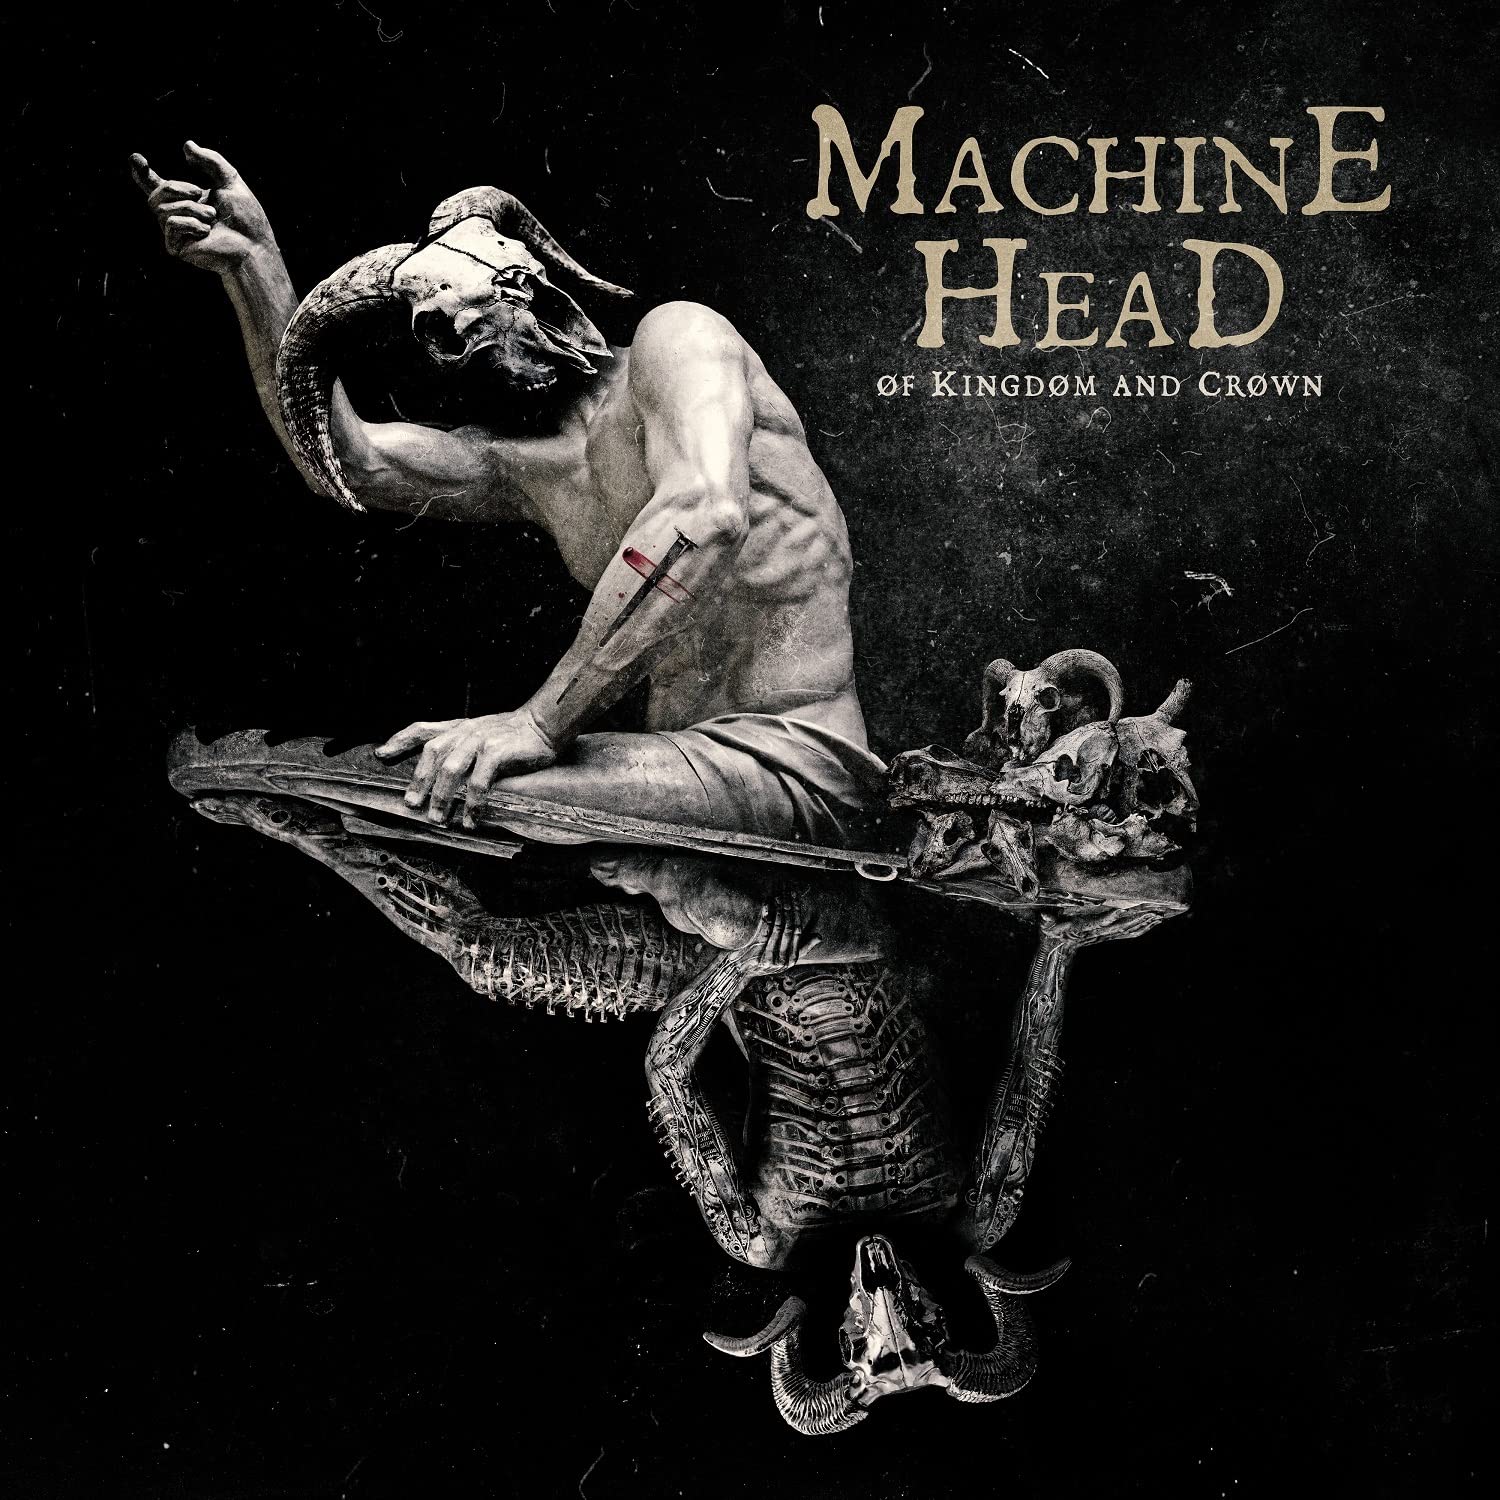 THE WEEKLY INJECTION – New Releases From MACHINE HEAD, SIGH & More Out Today 8/26